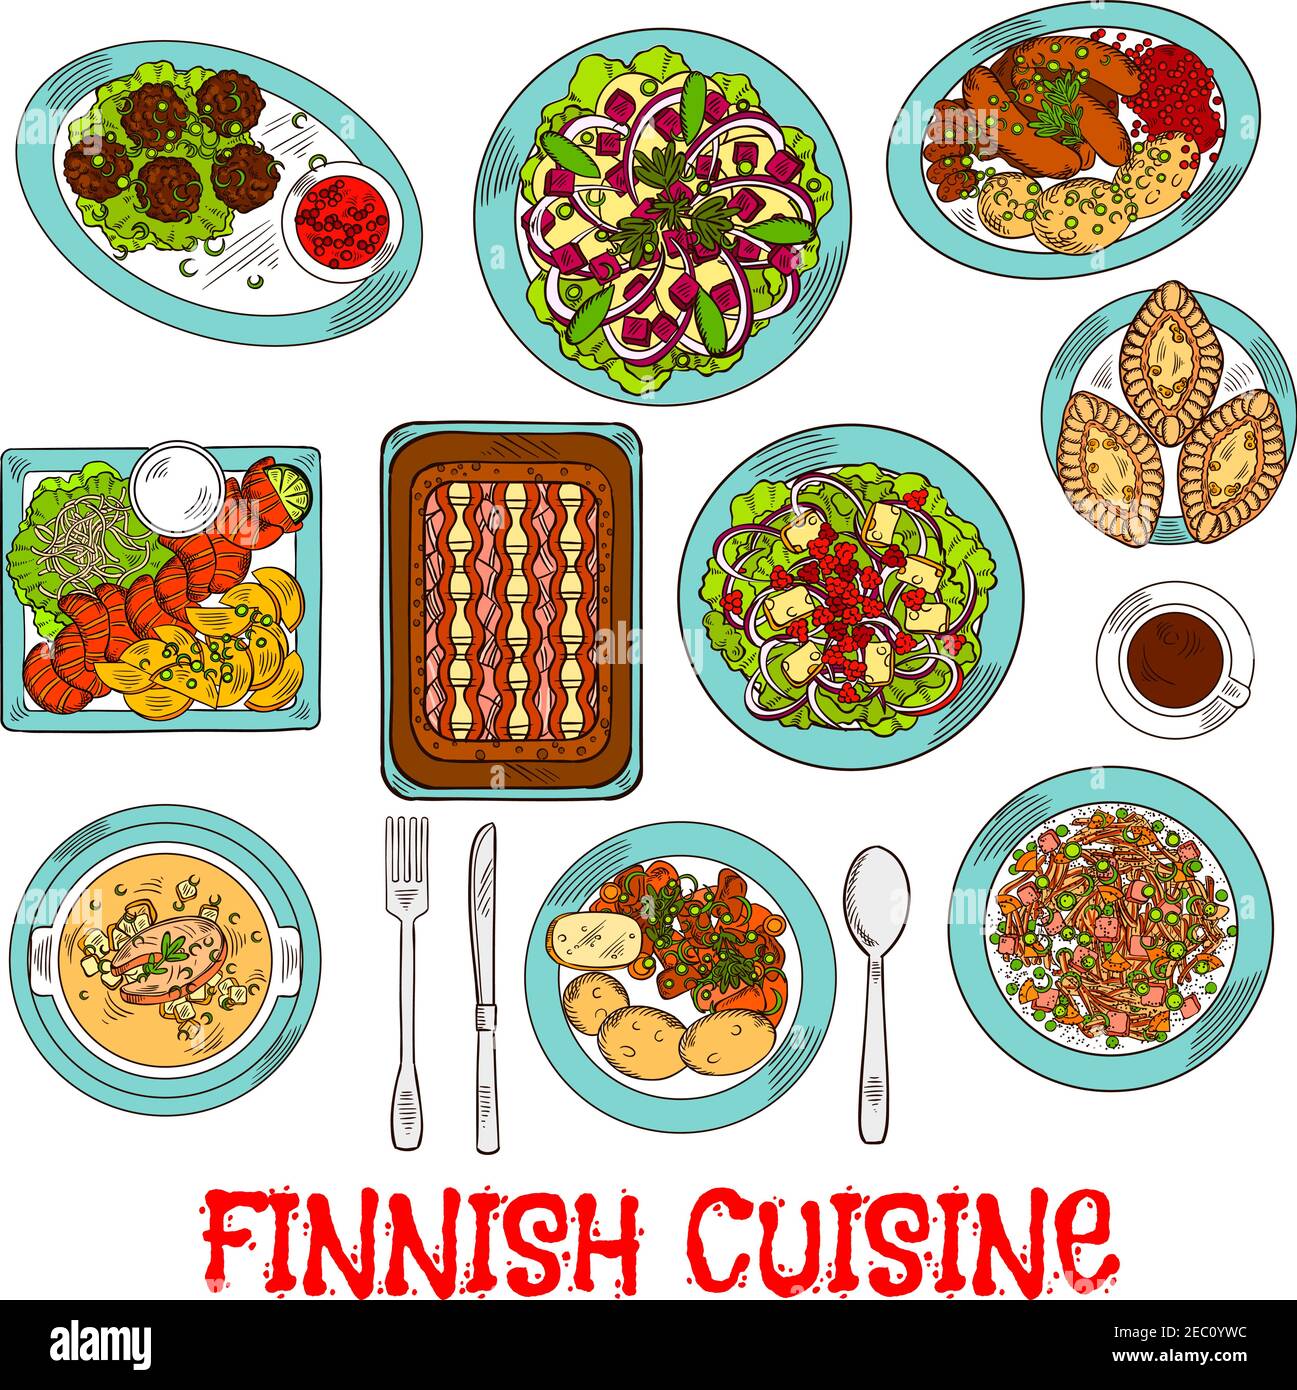 National finnish cuisine dishes with smoked salmon and vegetables, rice and fish rye pies, sausages and meatballs with berry jam, cabbage and reindeer Stock Vector